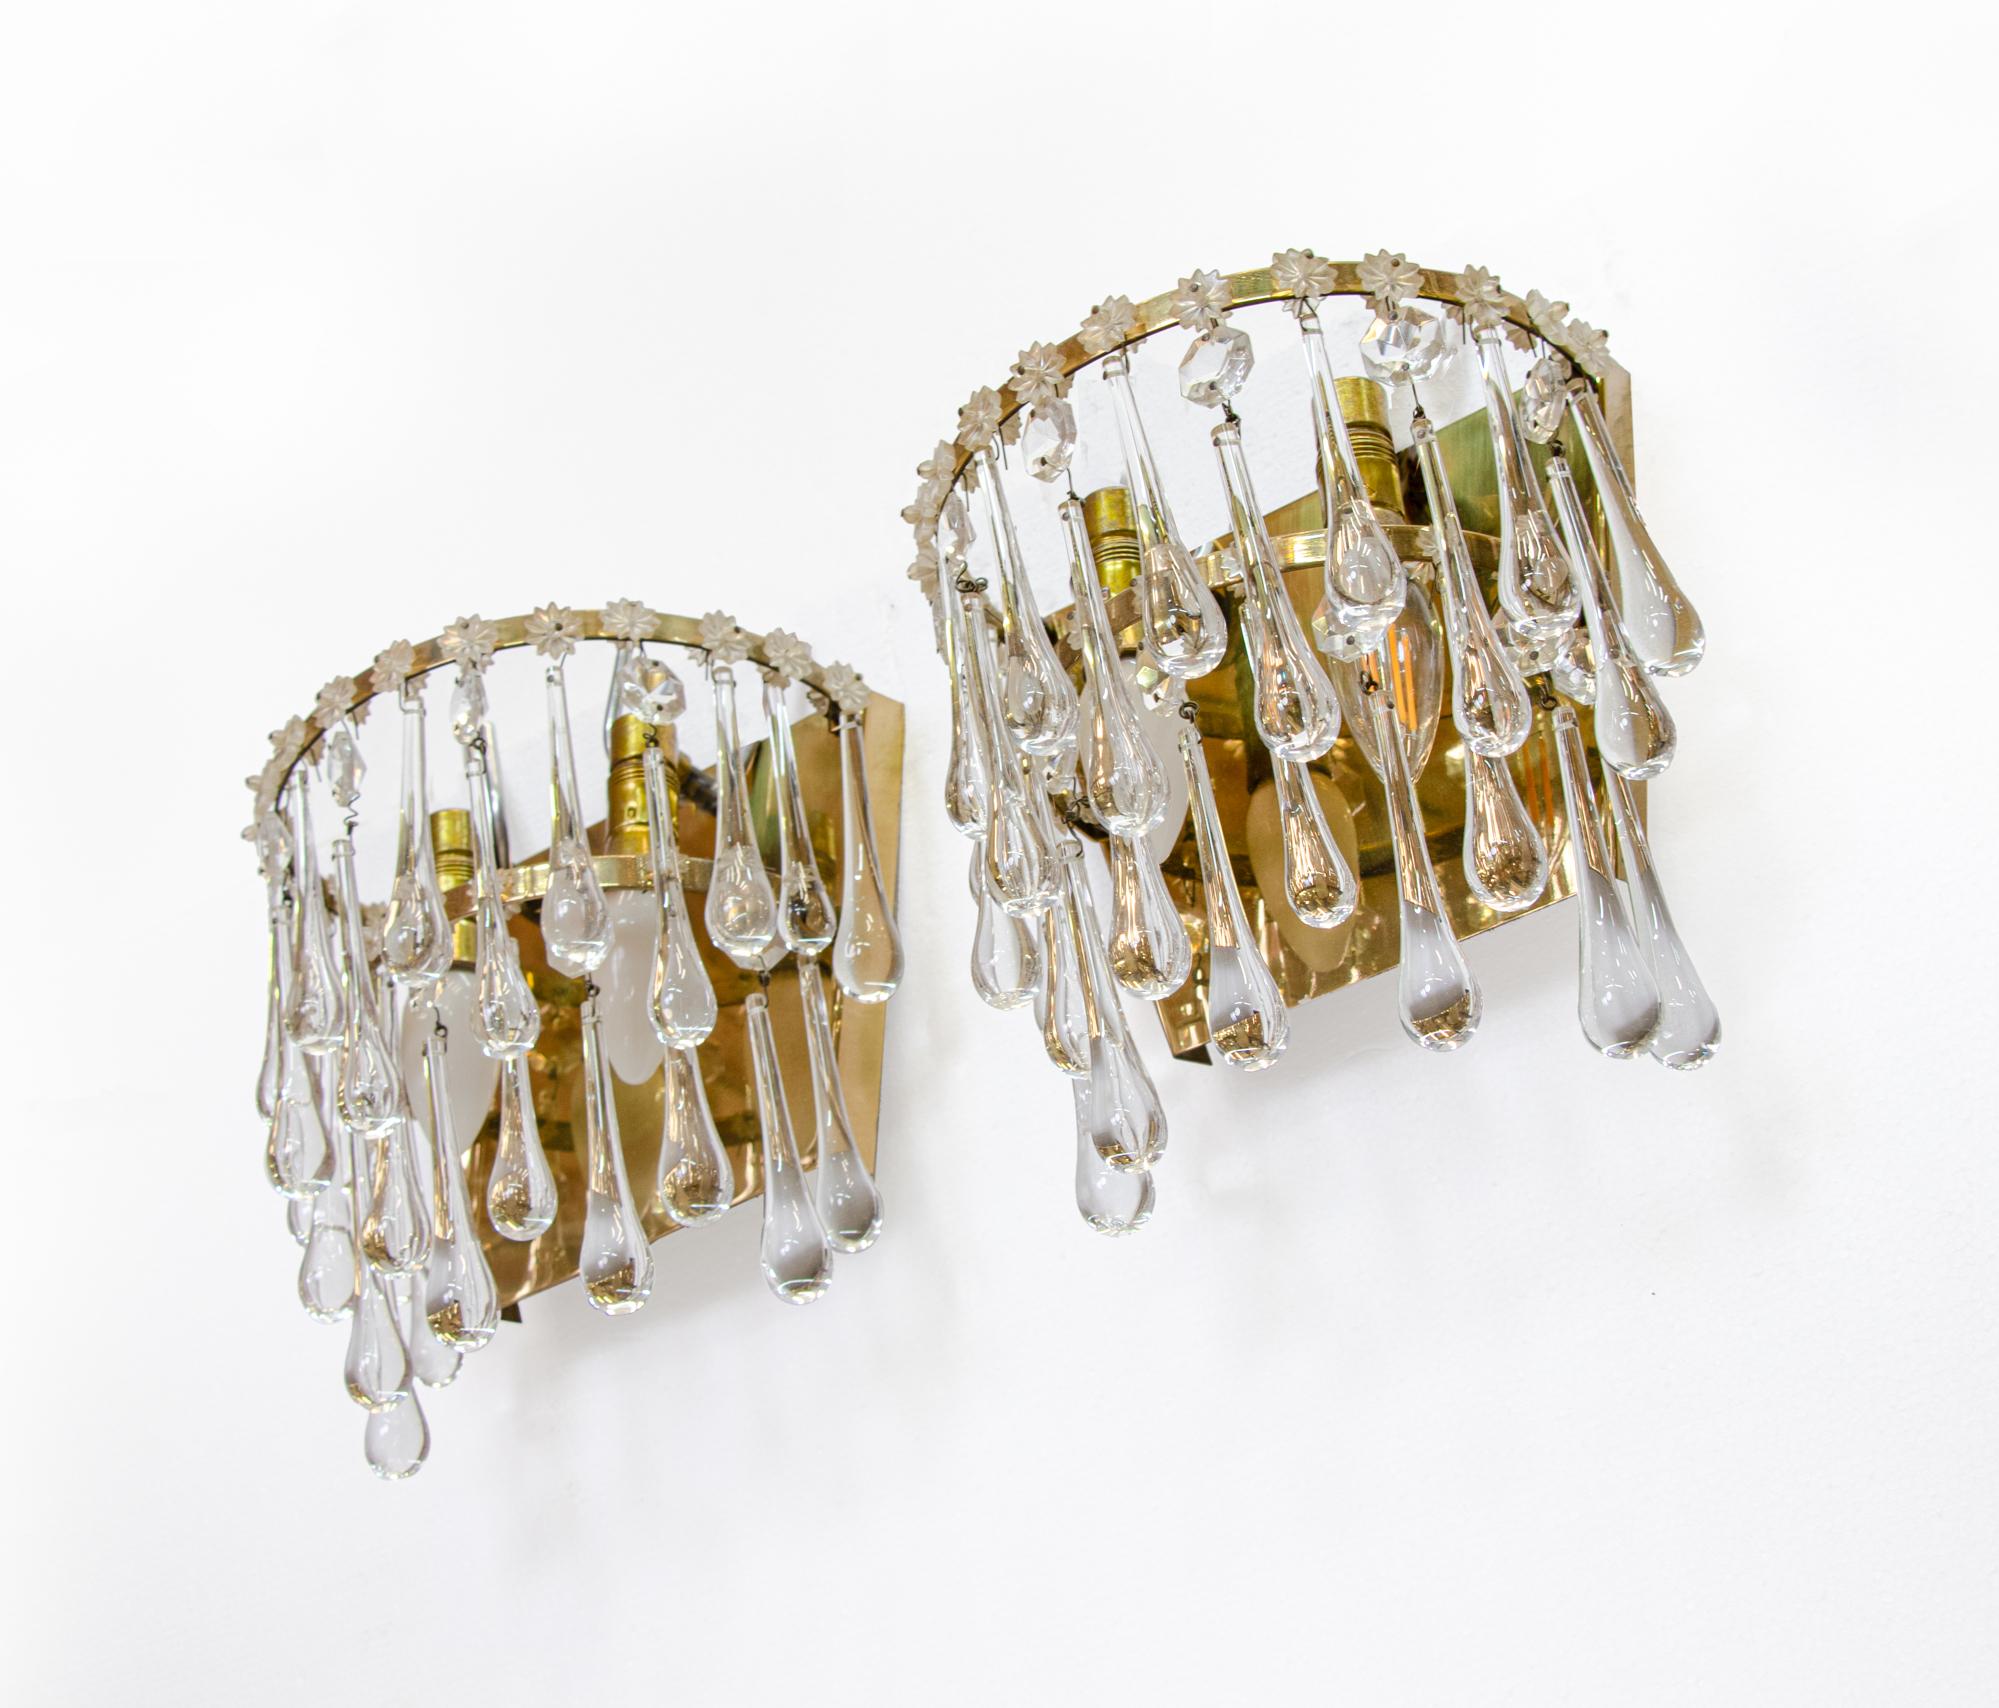 Elegant set of wall lights with teardrop crystals on a tiered brass base. 

Measures: width 9.5